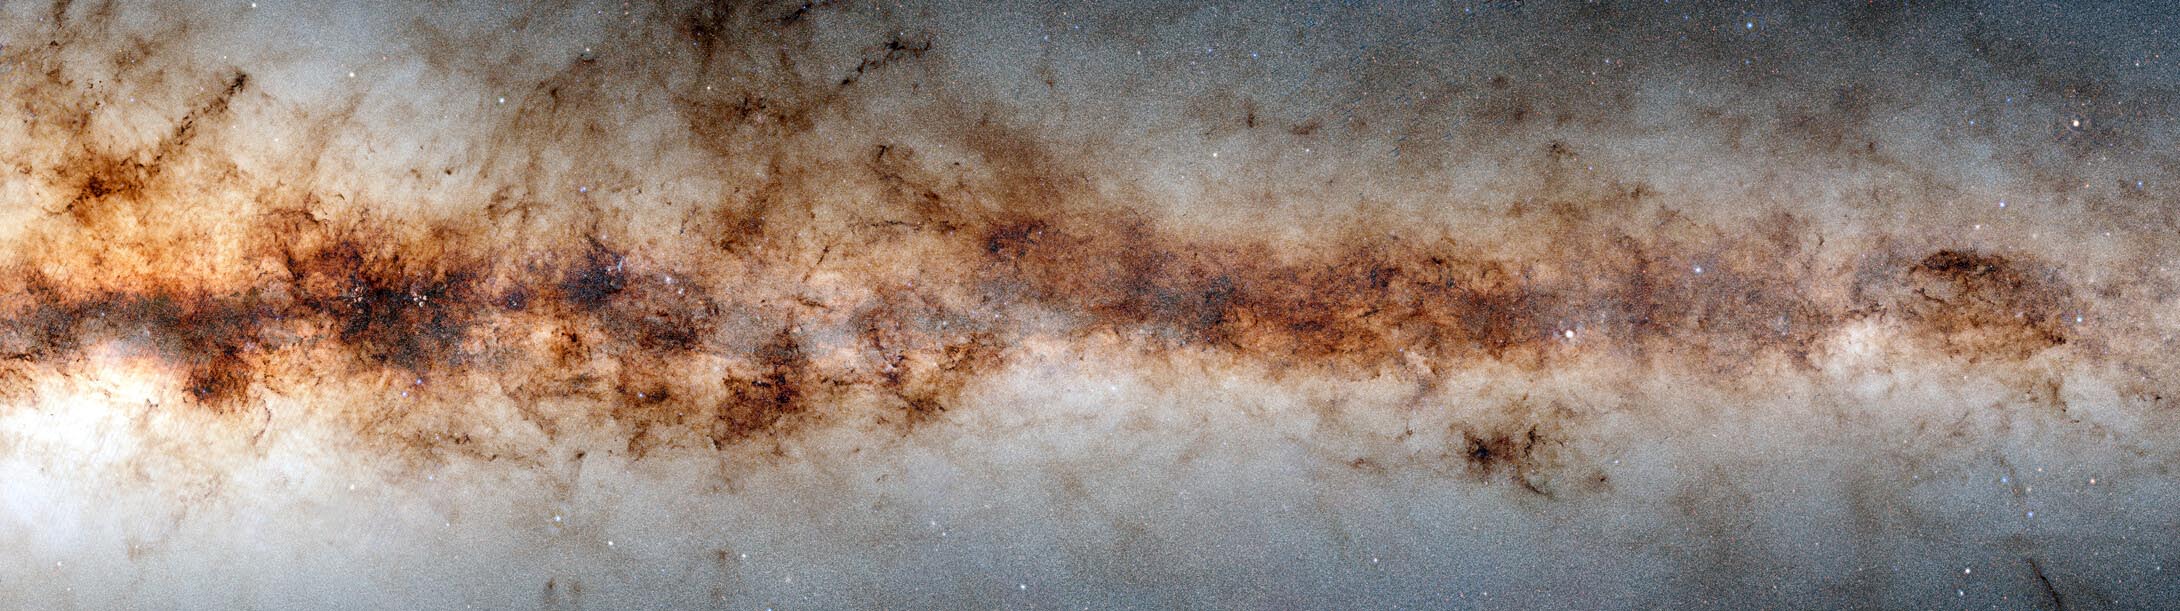 Astronomers have released a gargantuan survey of the galactic plane of the Milky Way. 